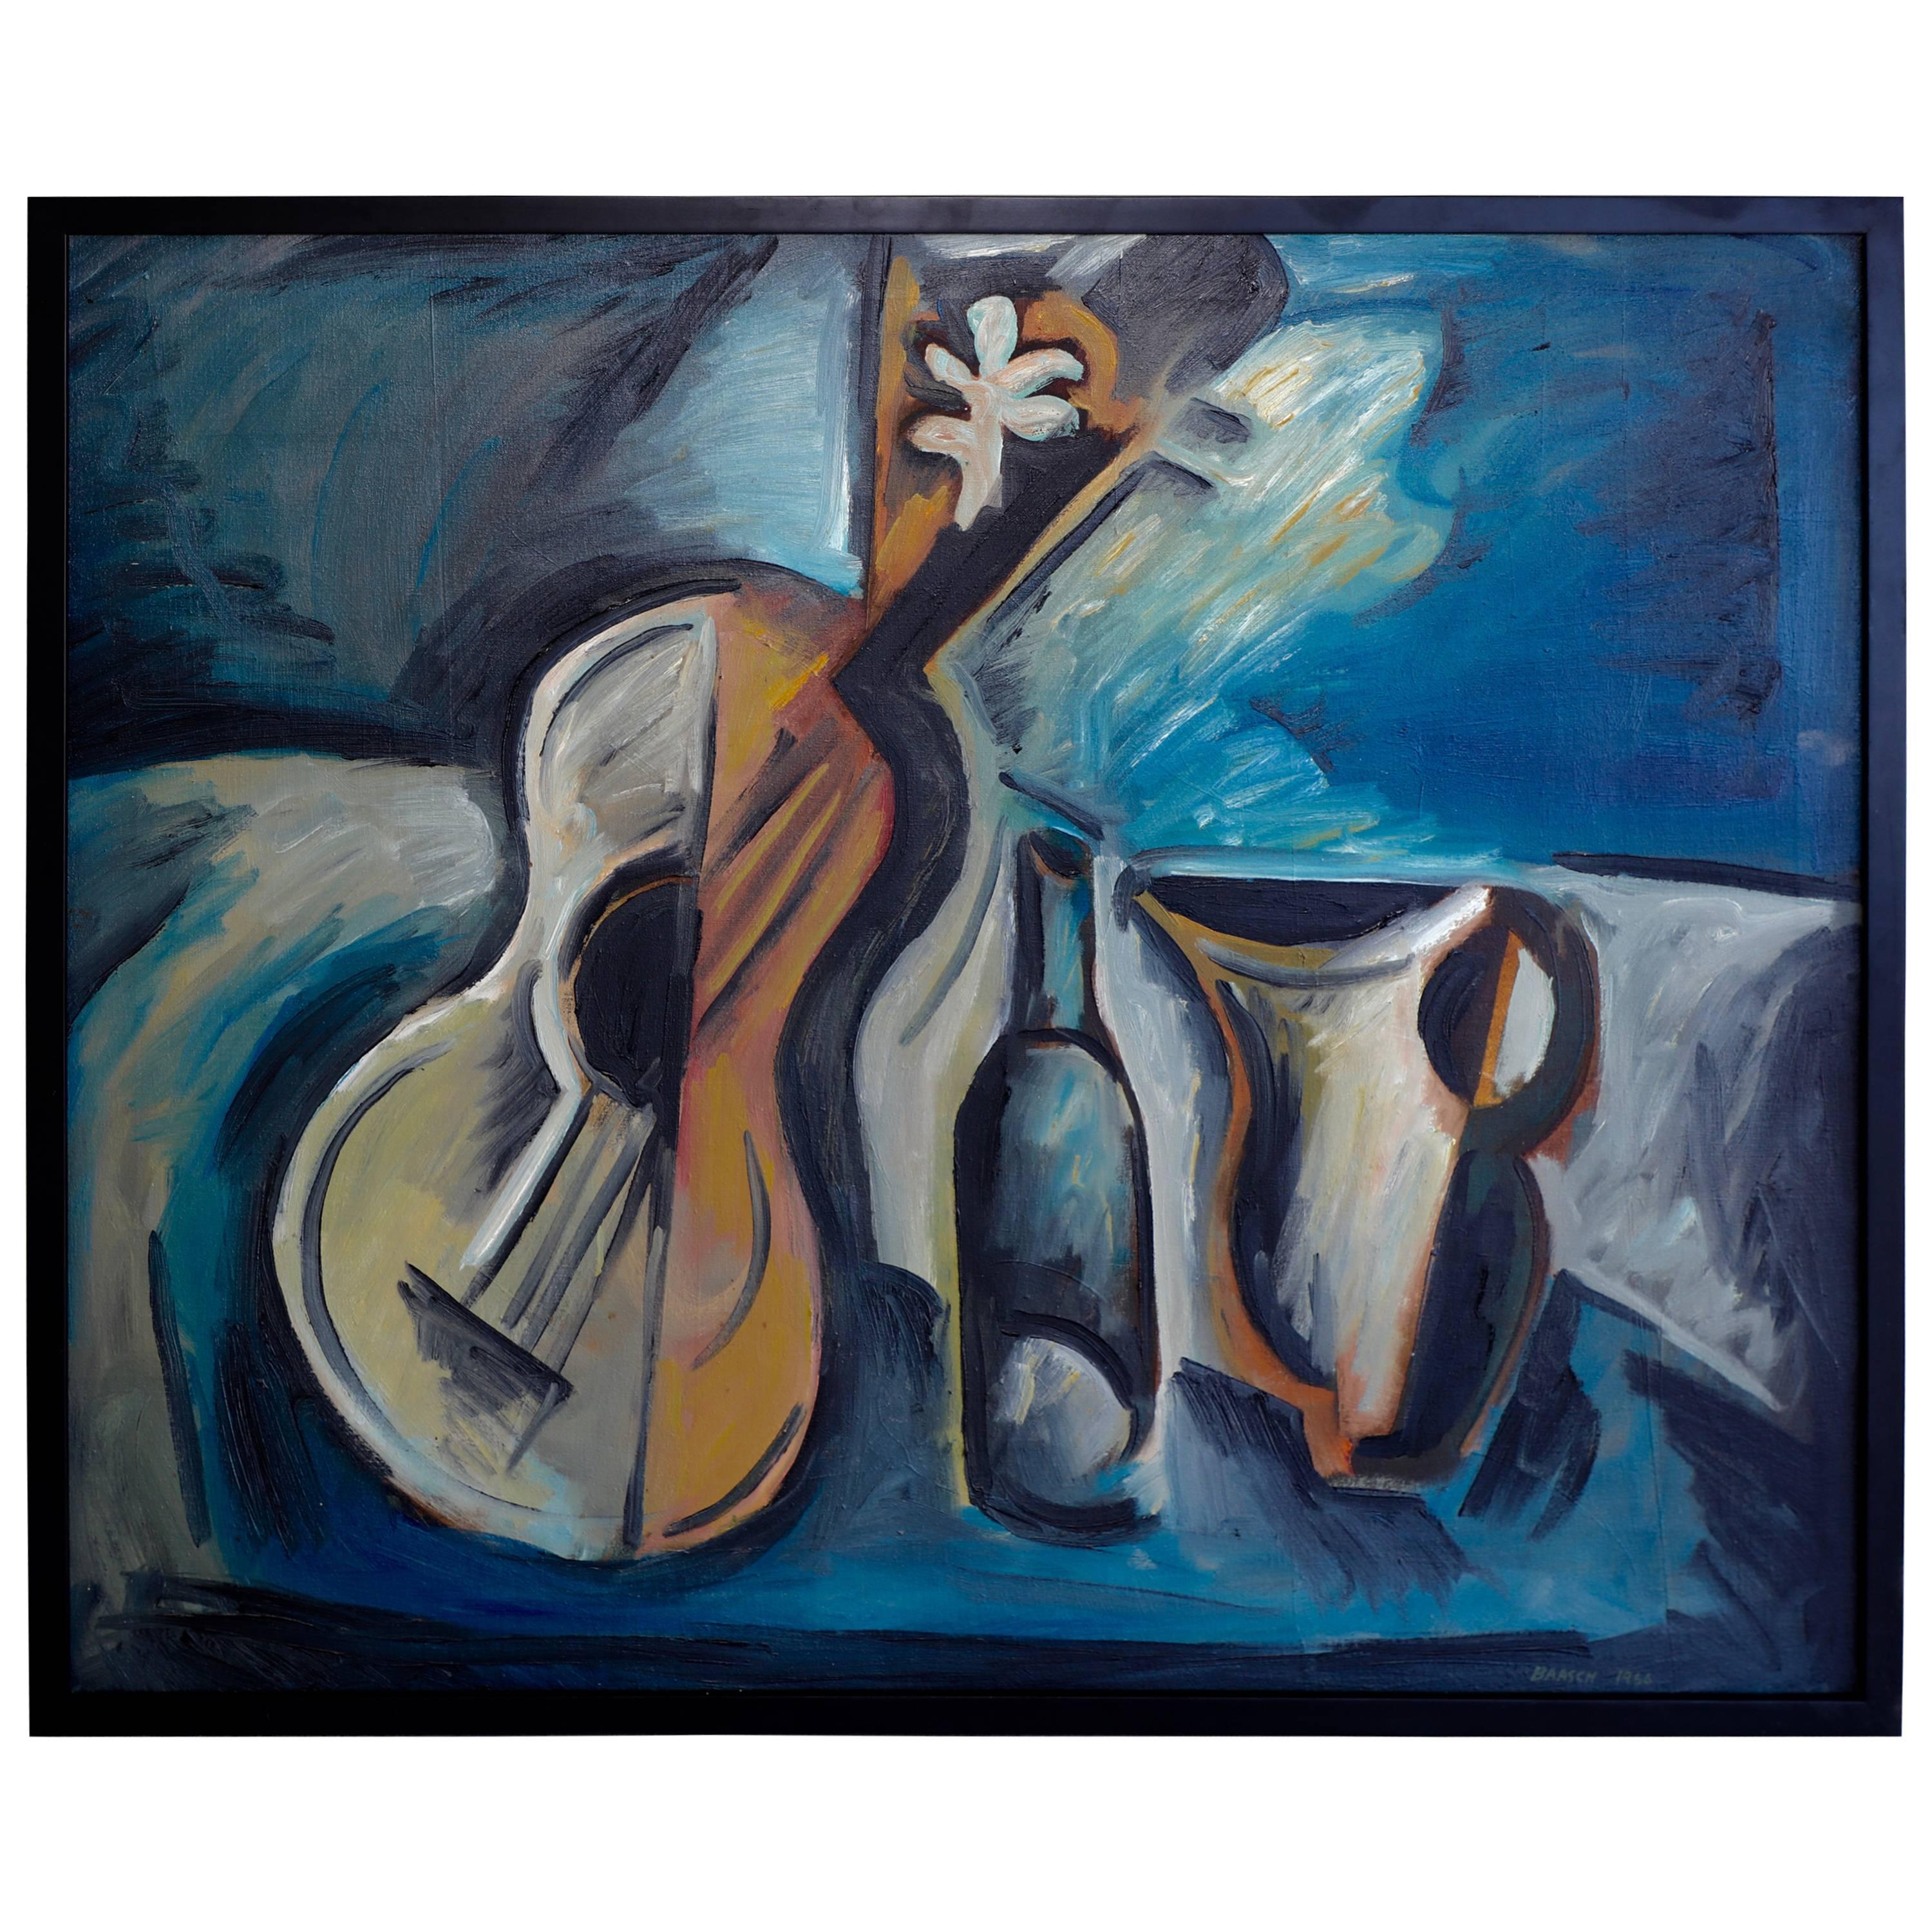 Norman Baasch Cubist Still Life of a Violin Dated 66 For Sale